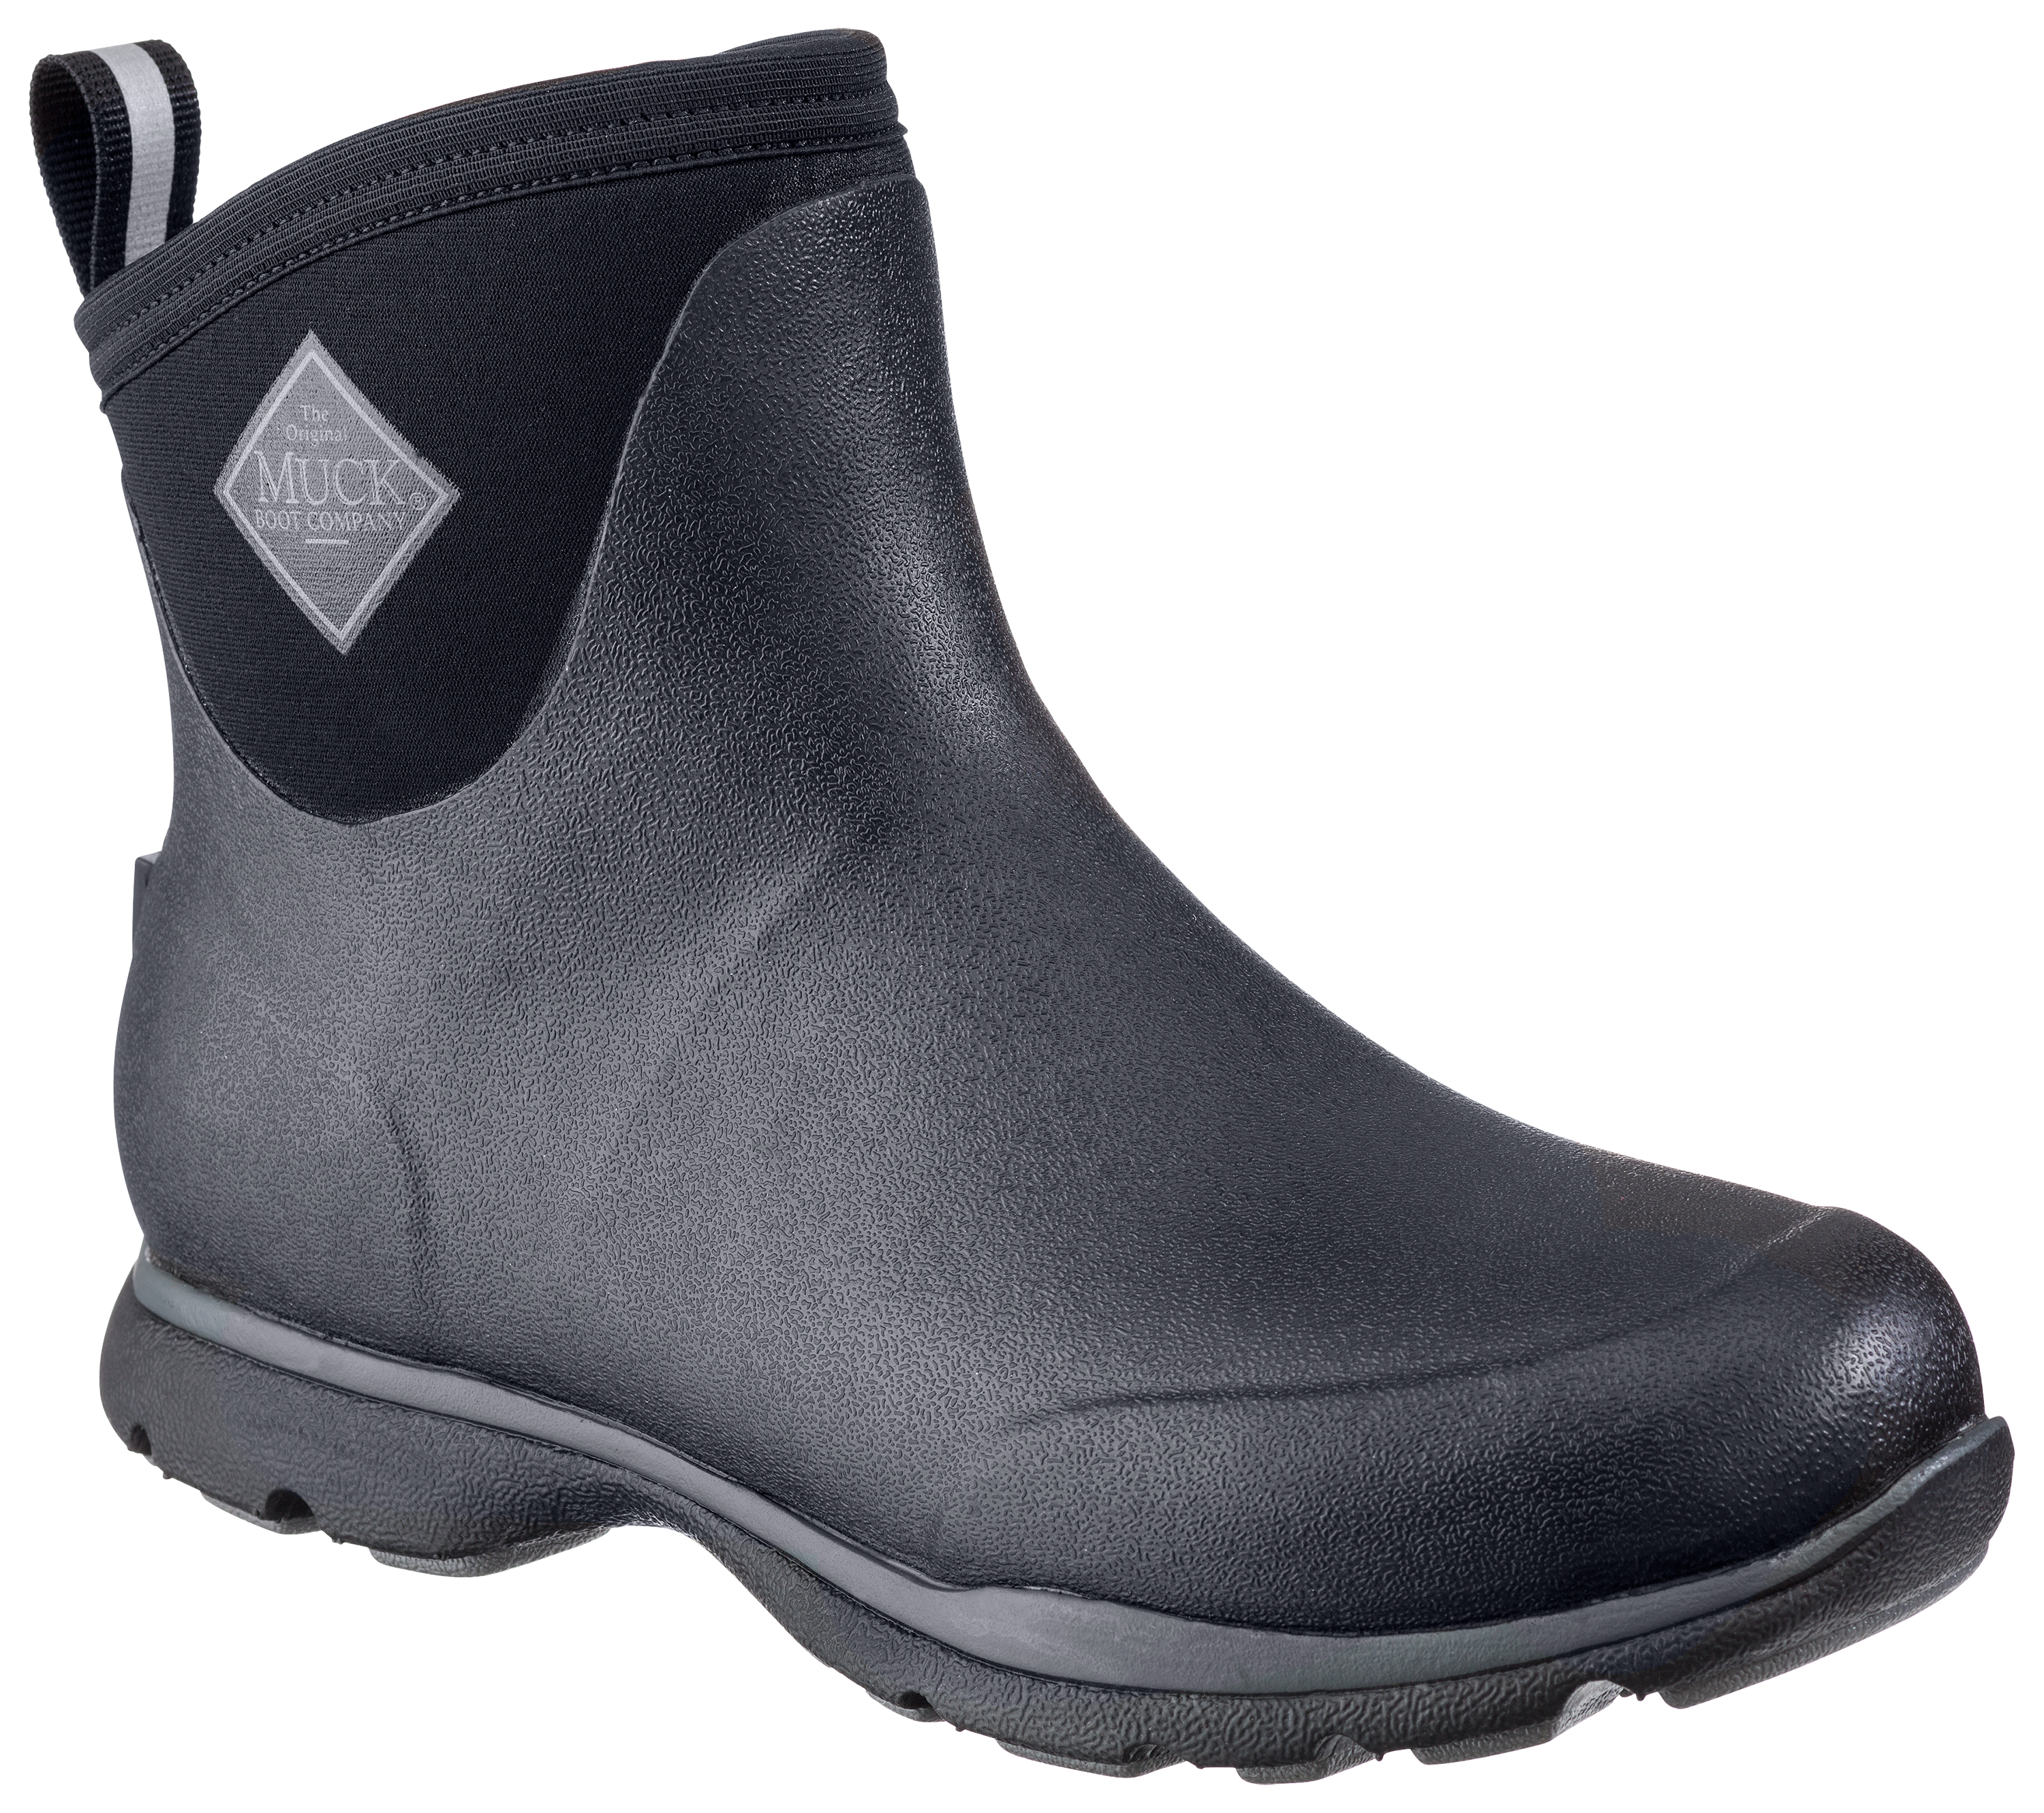 The Original Muck Boot Company Arctic Excursions Ankle Rubber Boots for Men